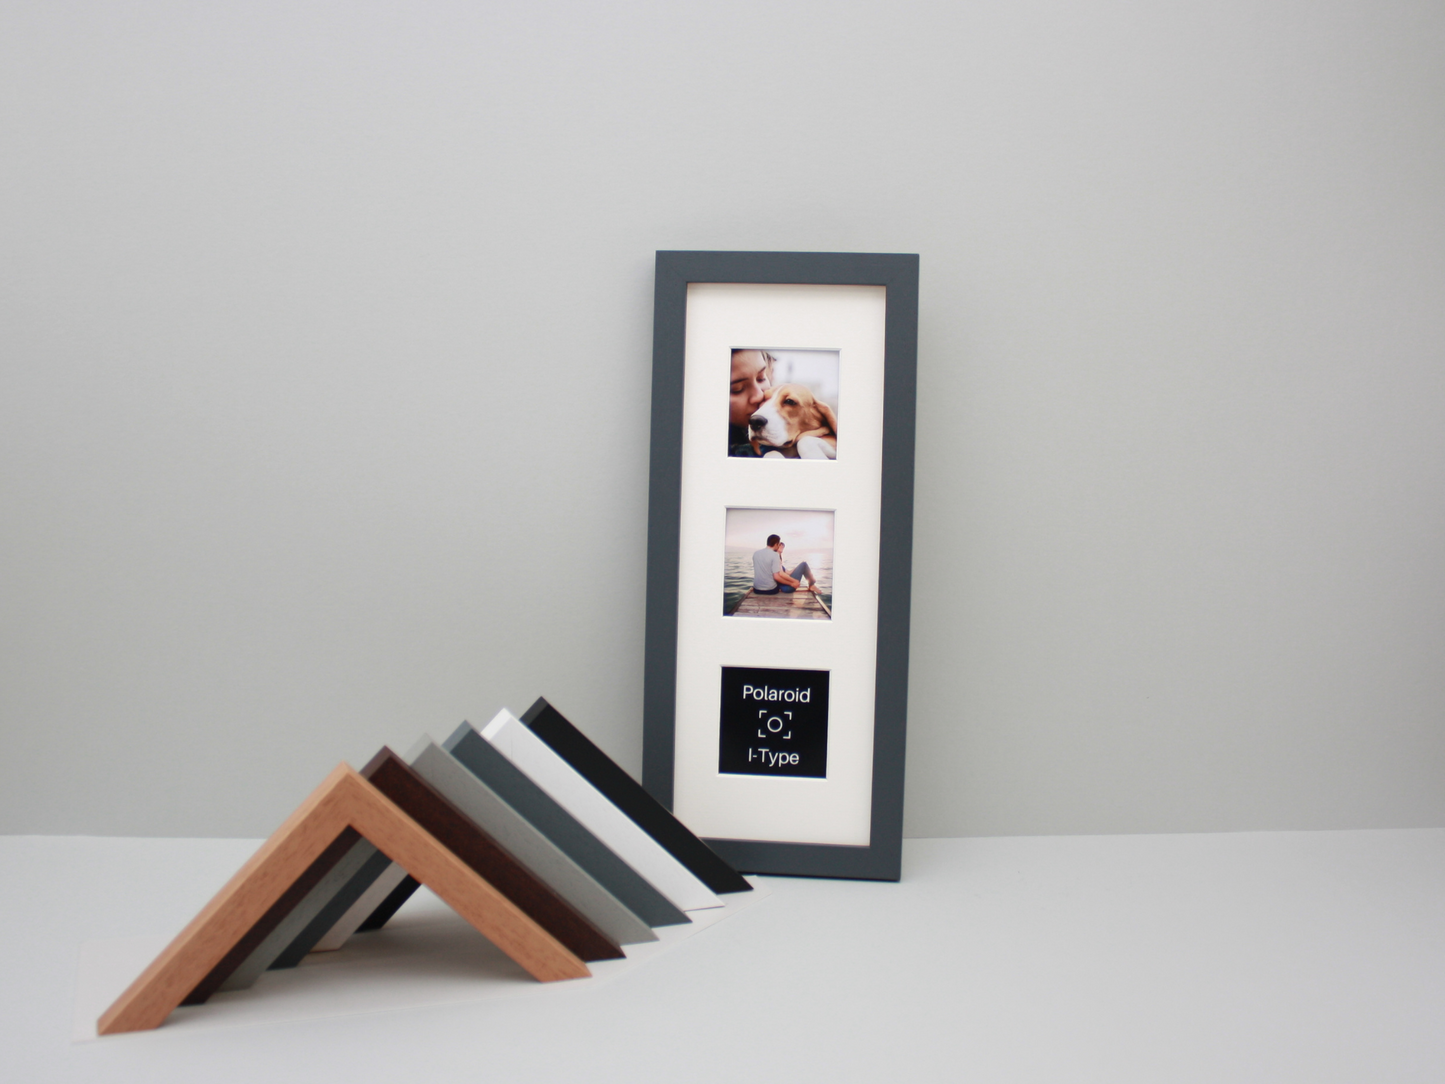 Polaroid I-TYPE - Wooden Multi Aperture Frame. Holds Three 76mmx76mm sized Photos. 15x40cm. Small Photos taken with Polaroid I-Type Camera. - PhotoFramesandMore - Wooden Picture Frames